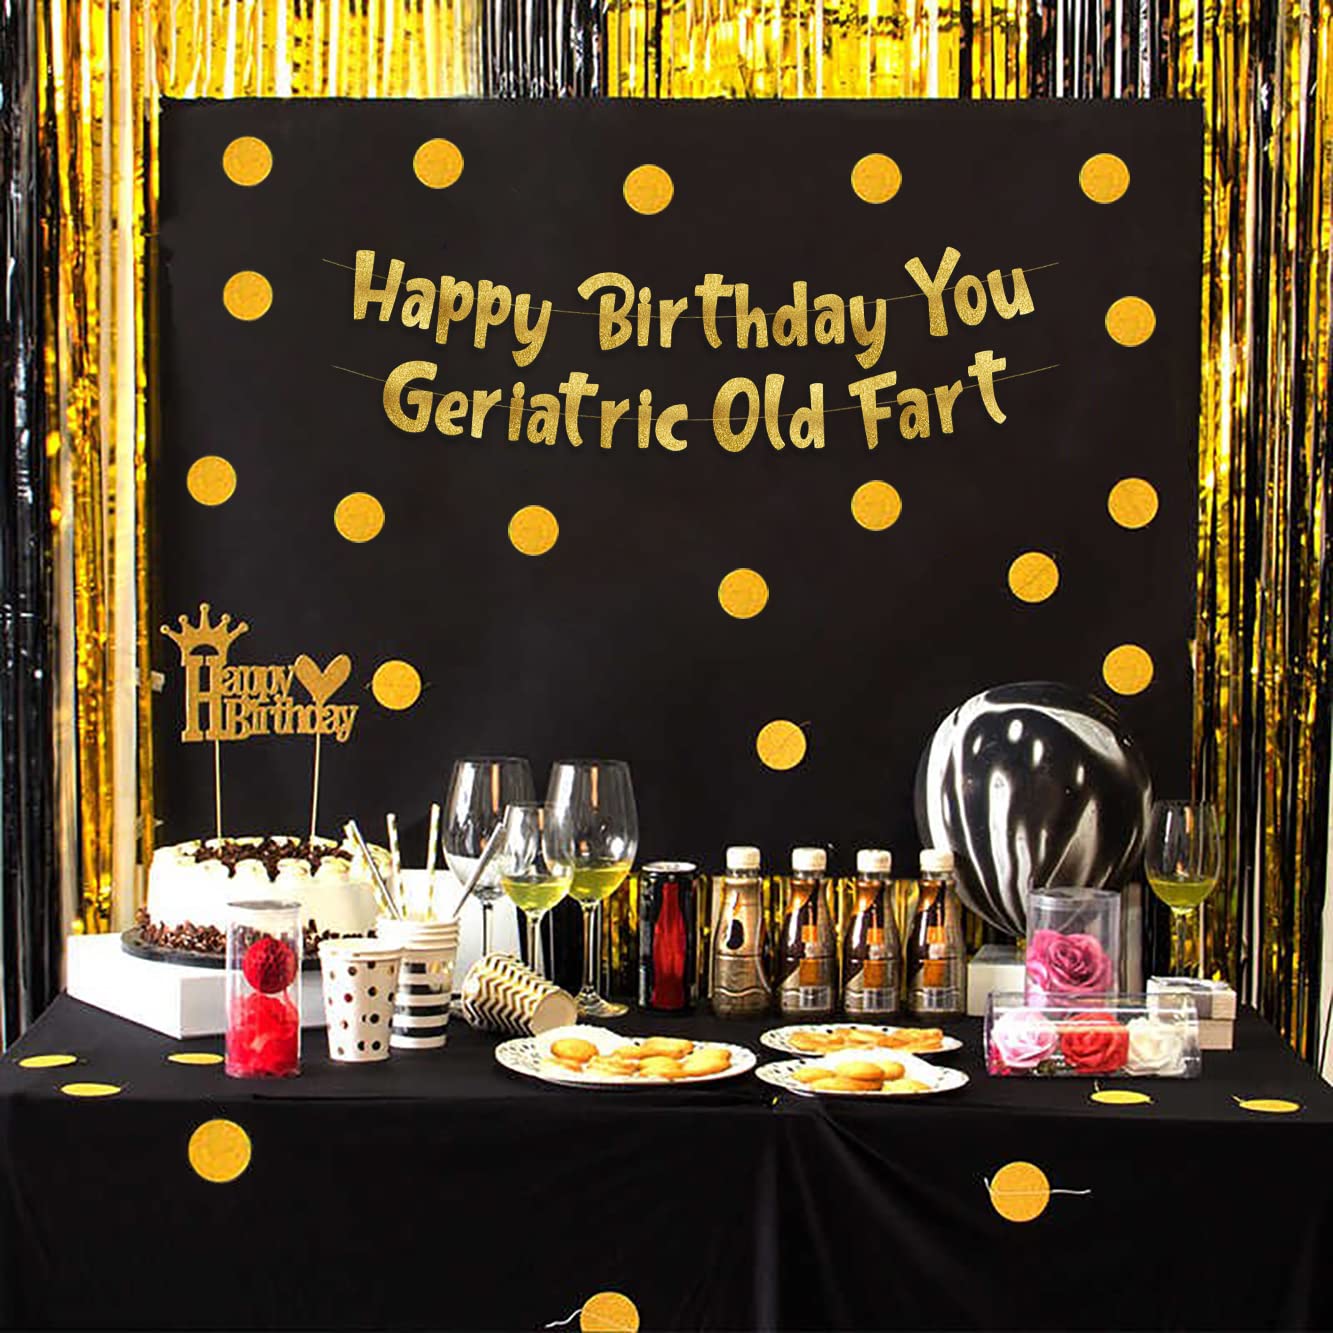 Hilarious Adult Birthday Gold Glitter Banner - Funny Birthday Party Supplies, Ideas, Gifts and Decorations